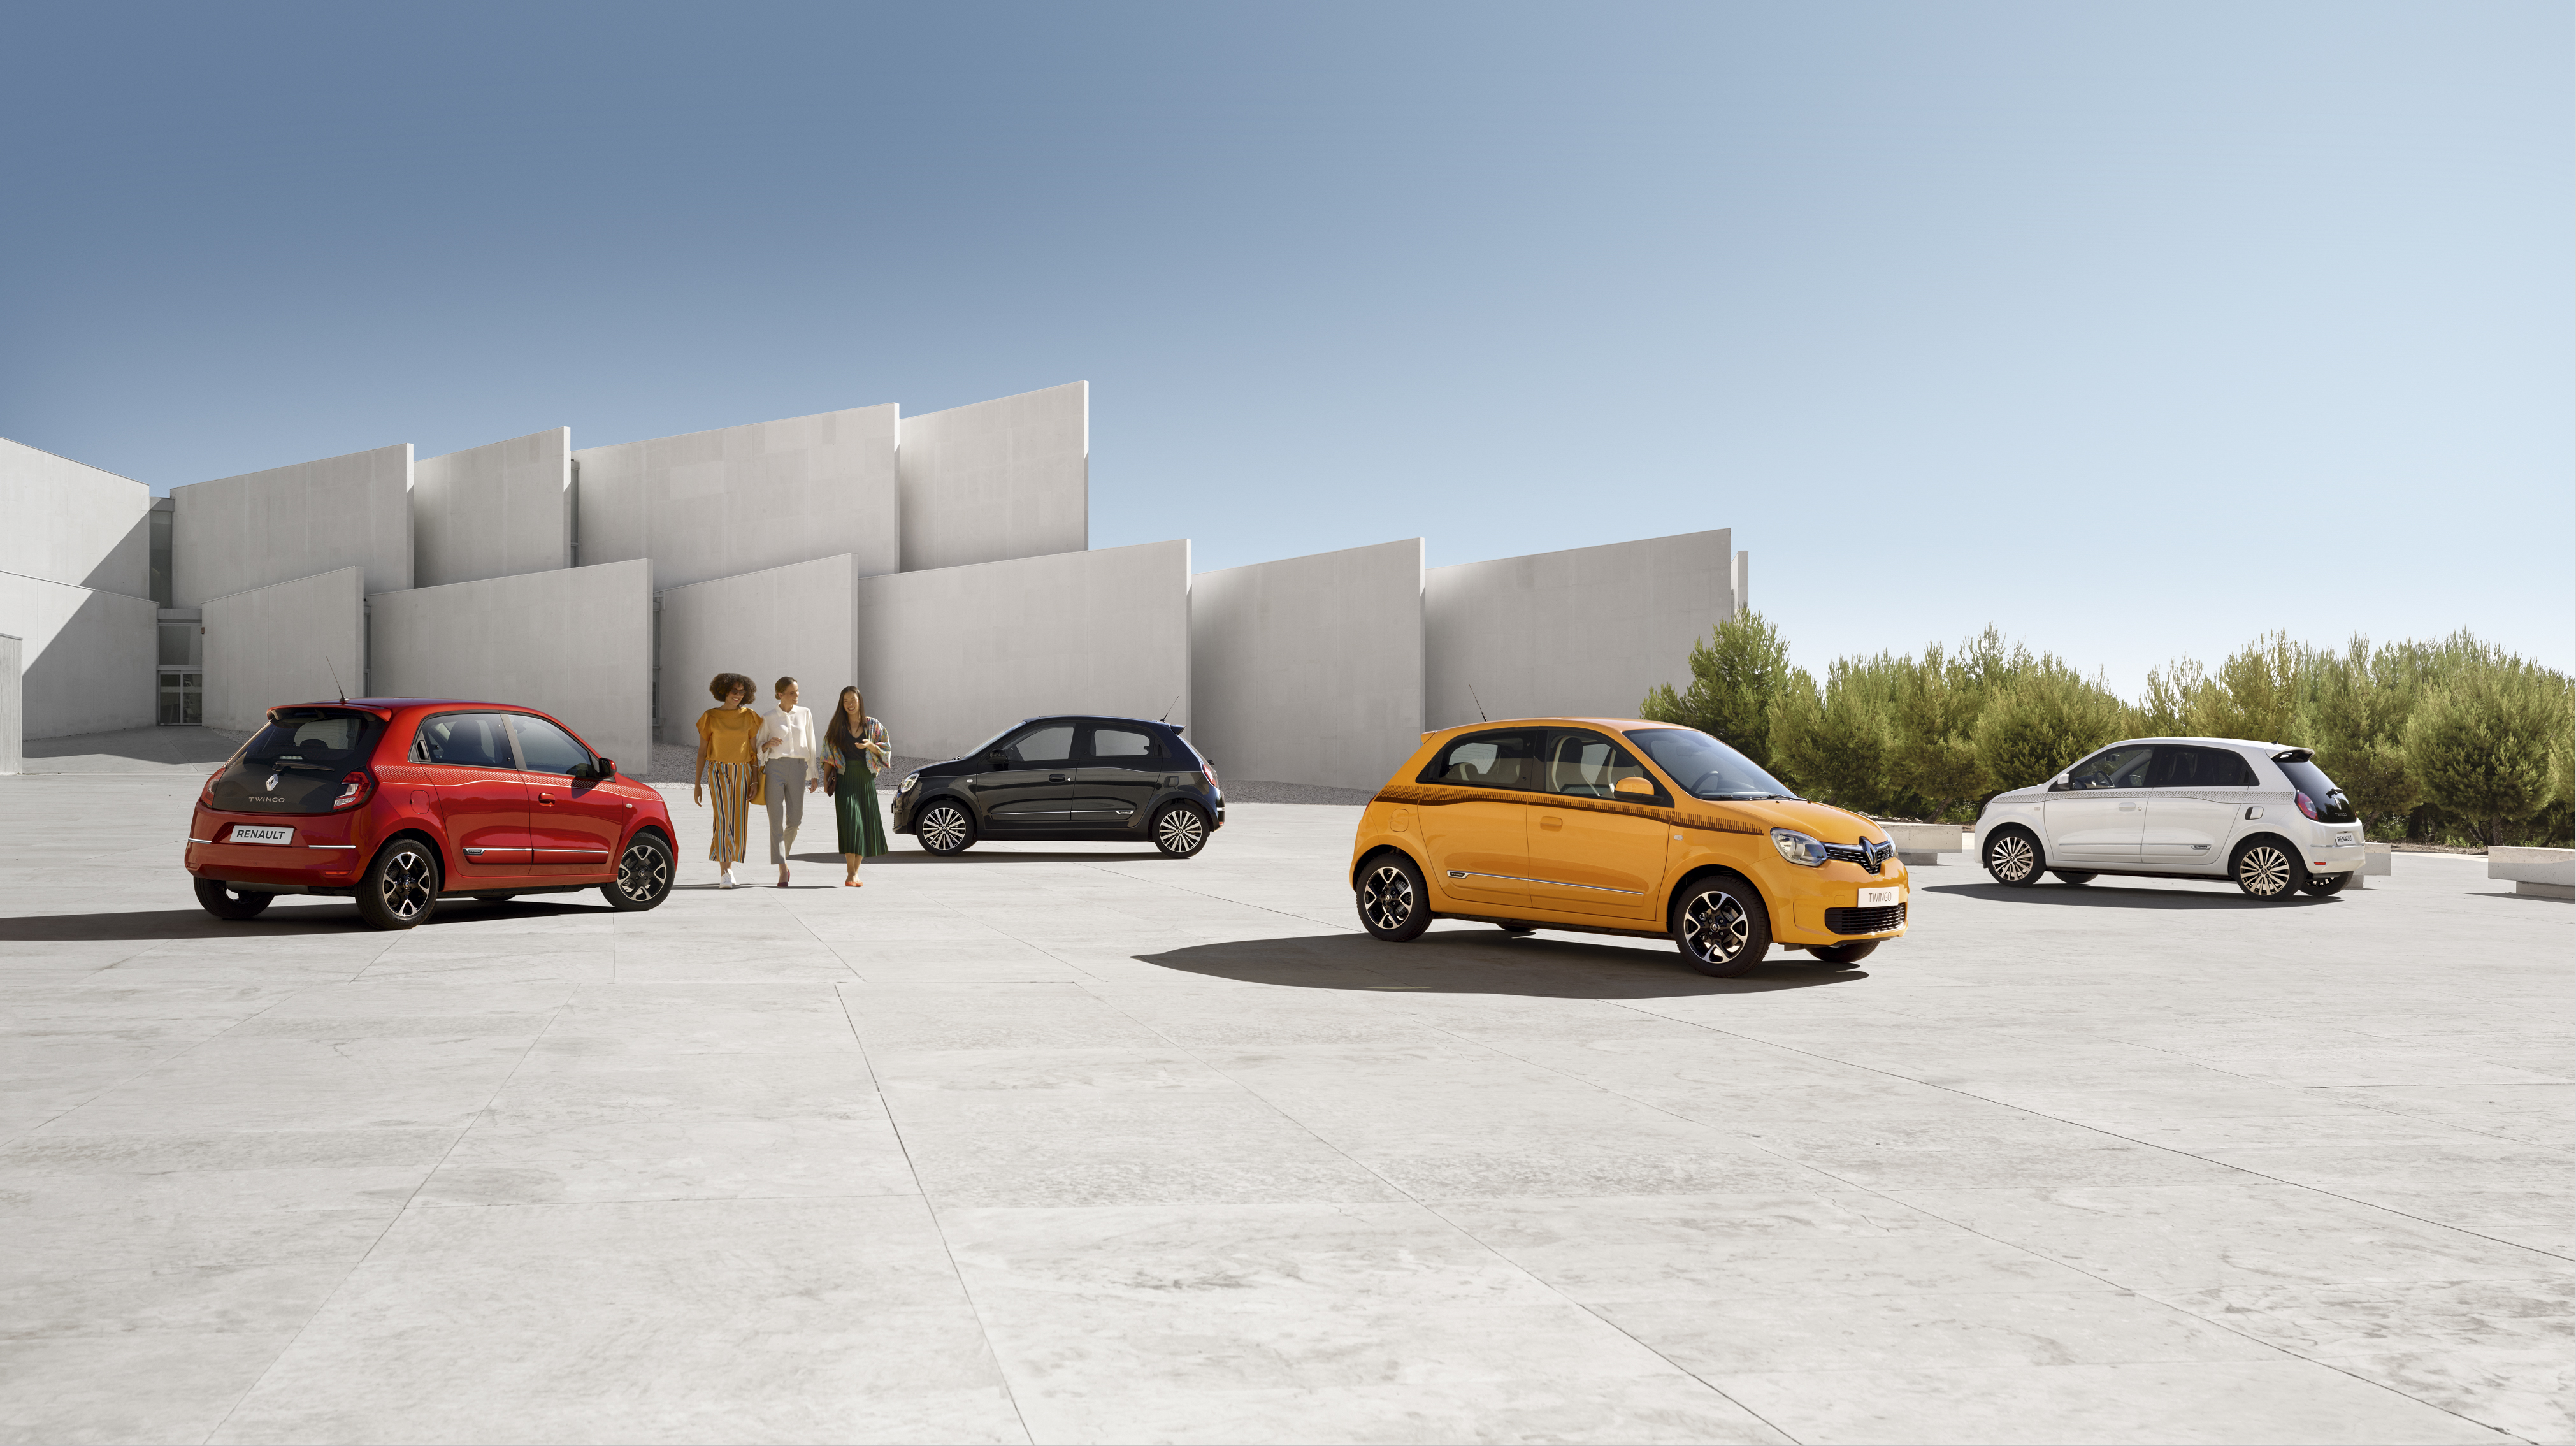 Renault Twingo exterior restyling